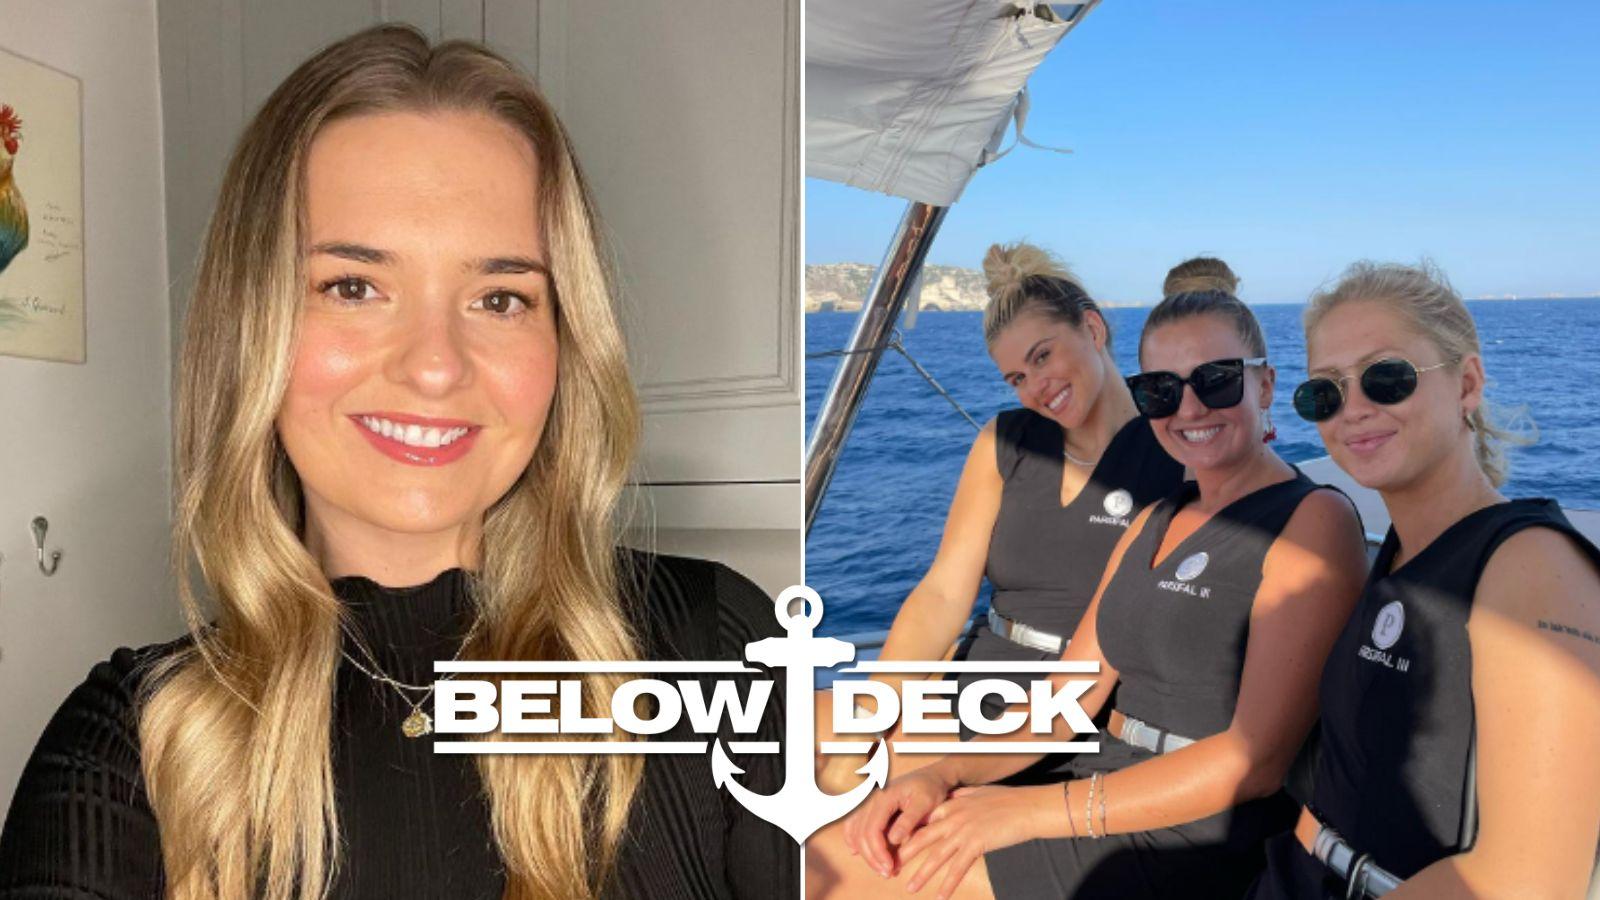 Daisy, Mads, and Lucy from Below Deck Sailing Yacht